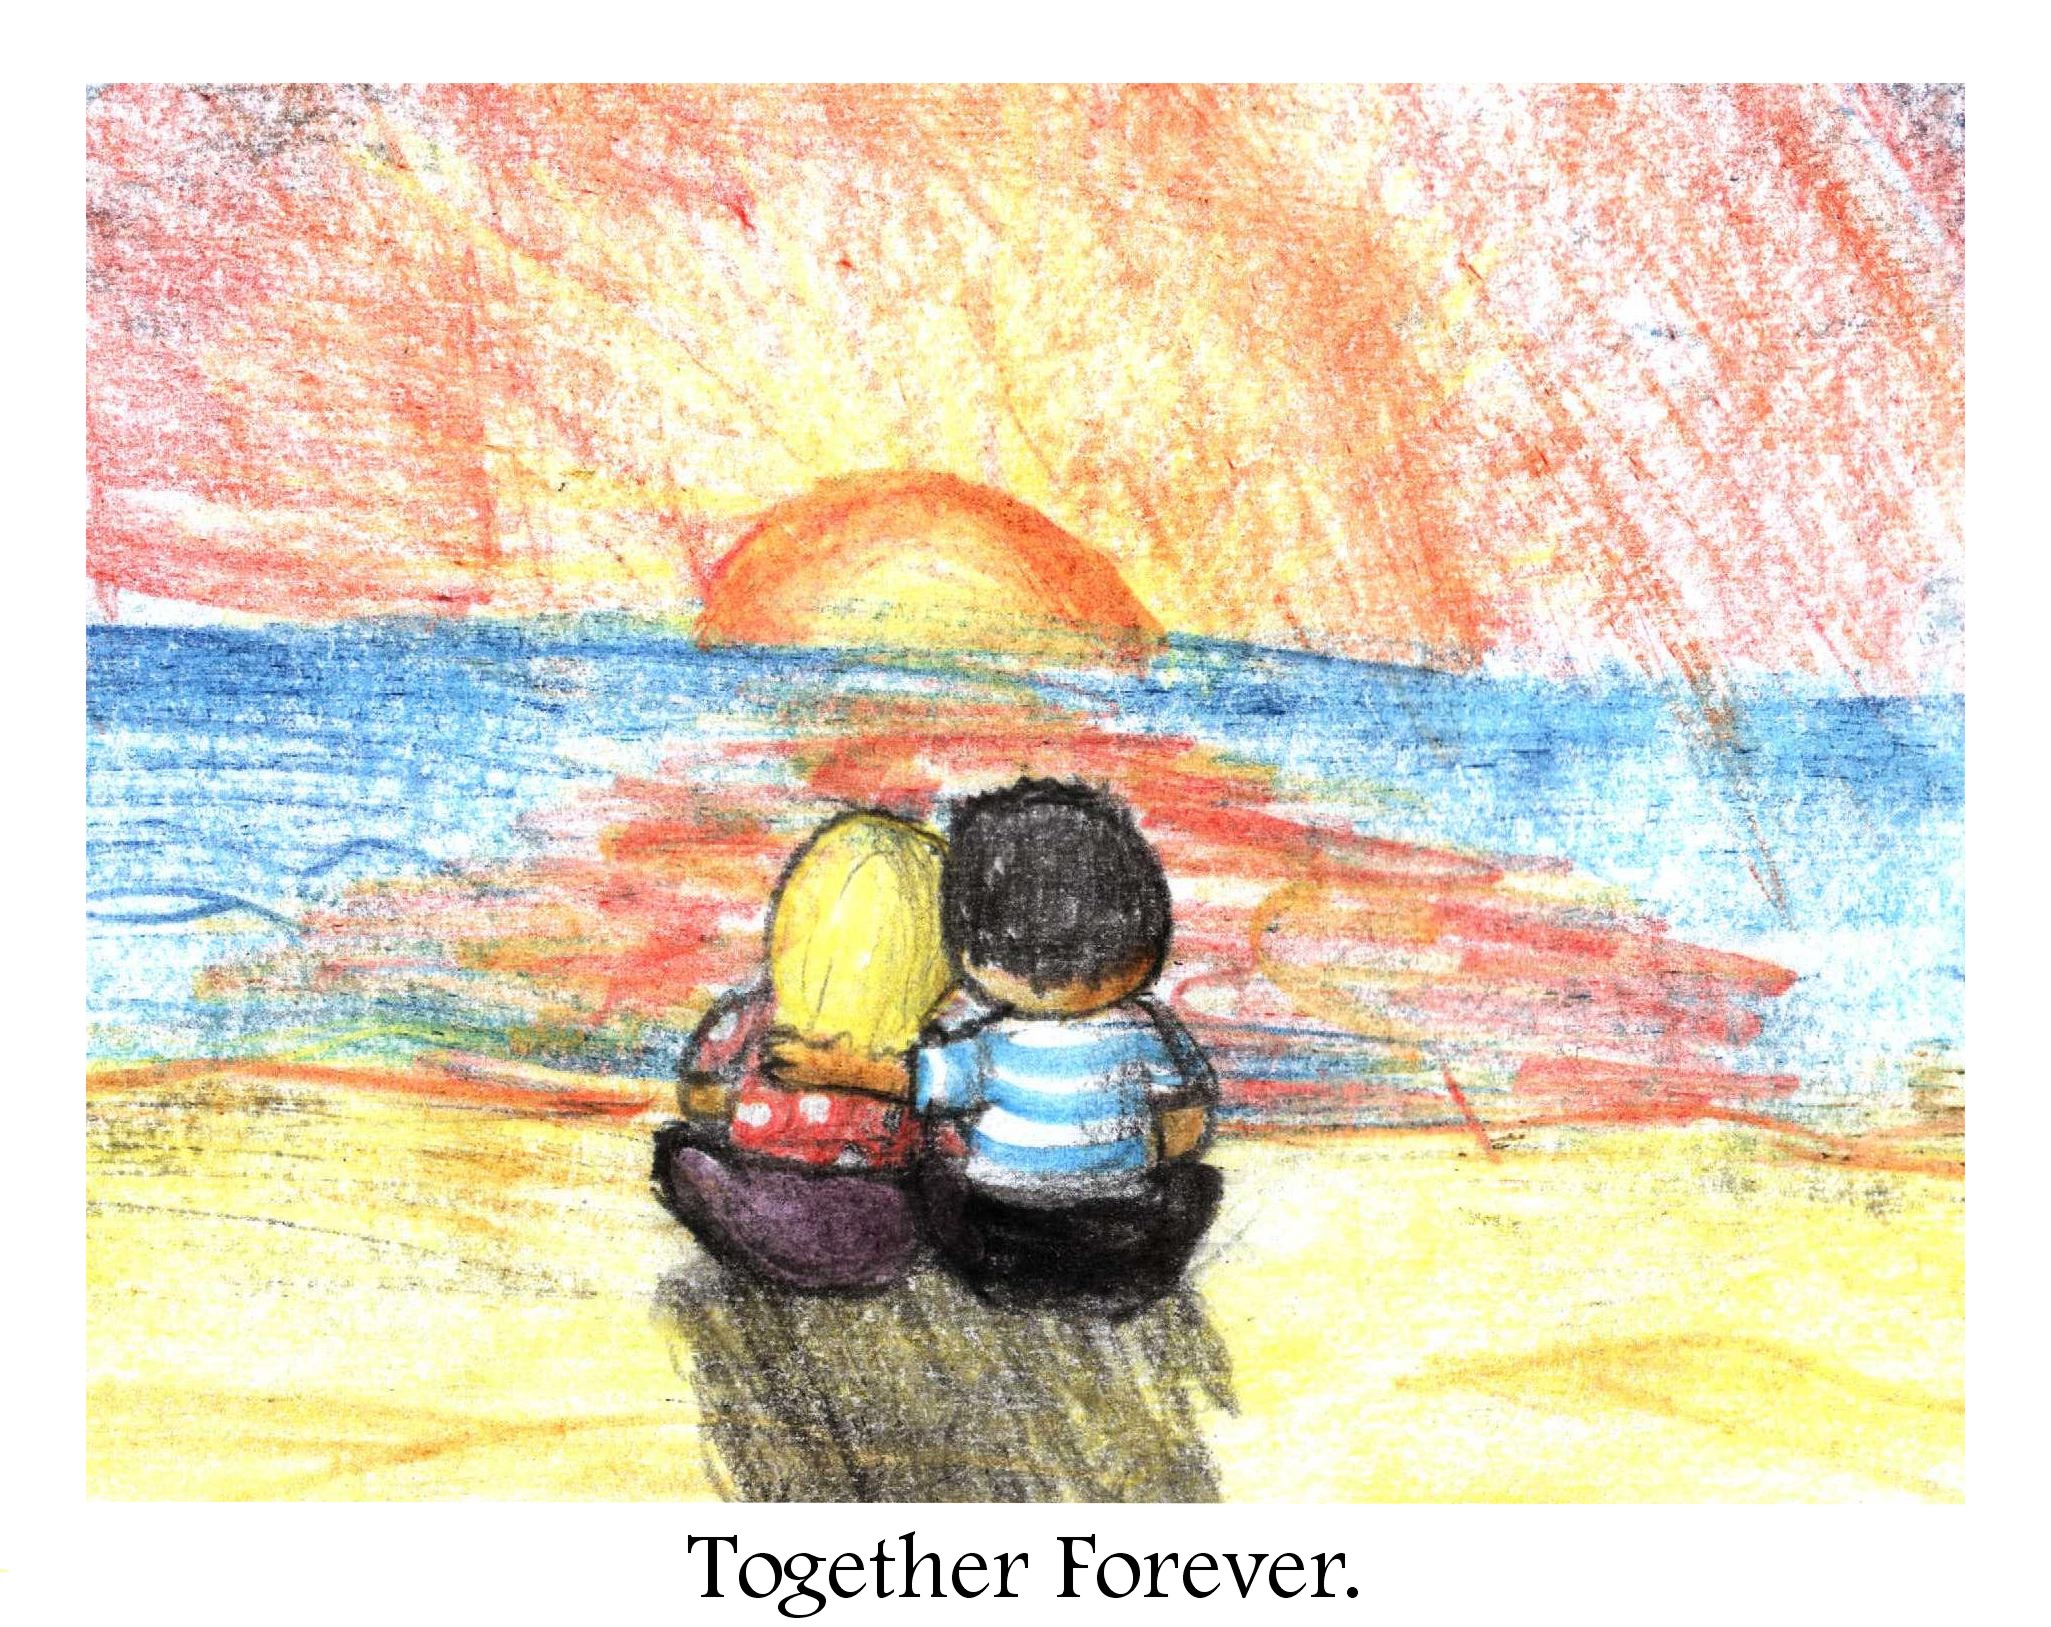 Together_Forever_by_Shadrky_Poland.JPG